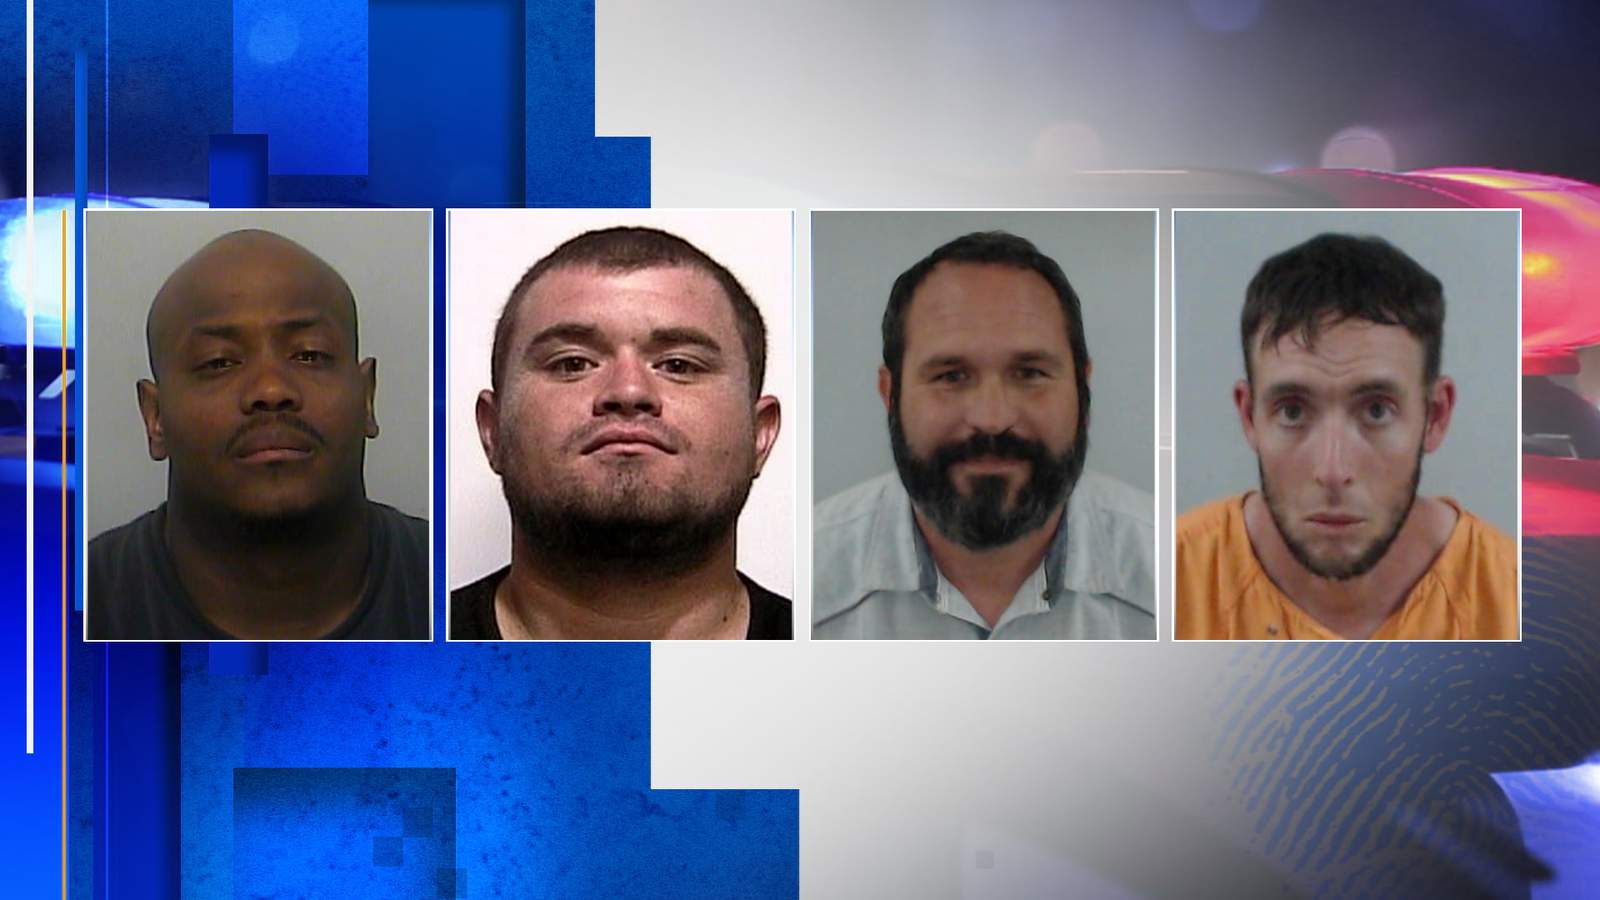 3 arrested, 1 wanted in heavy equipment theft operation